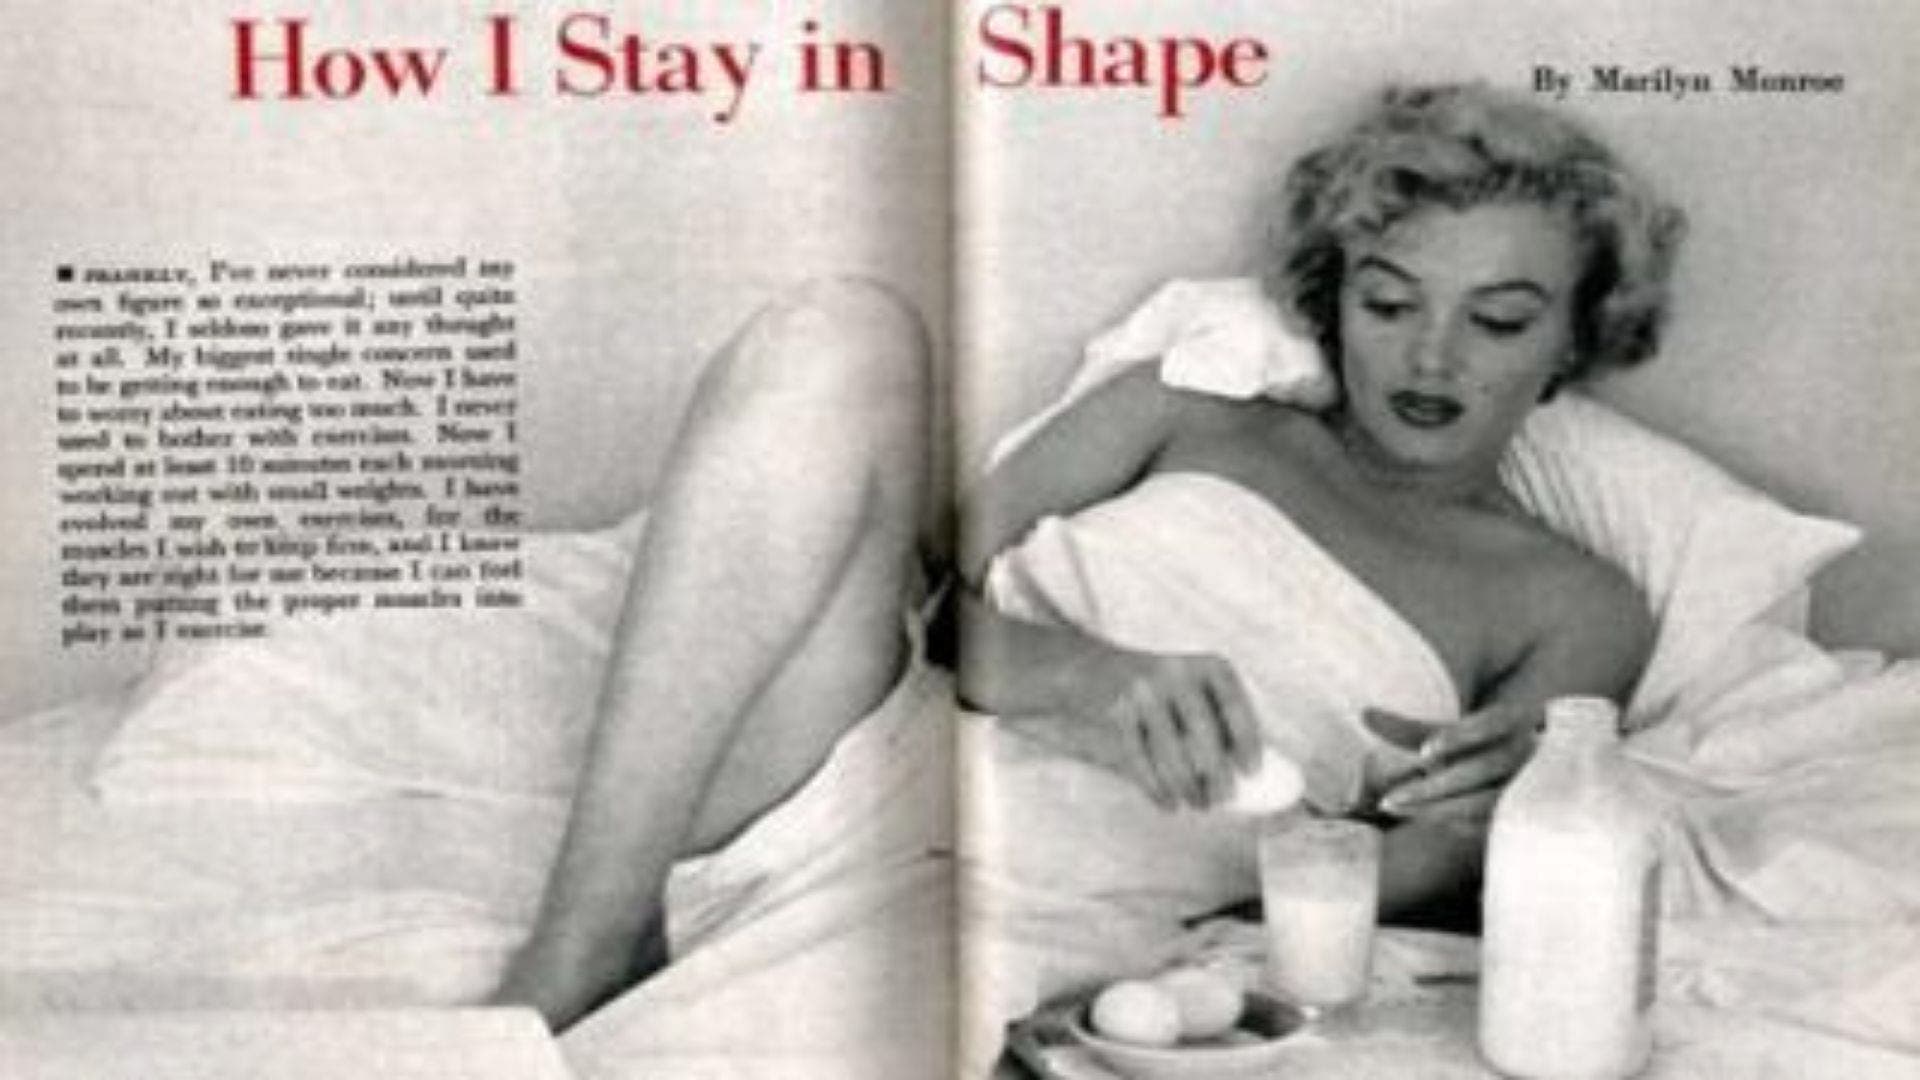 Did marilyn have threesomes